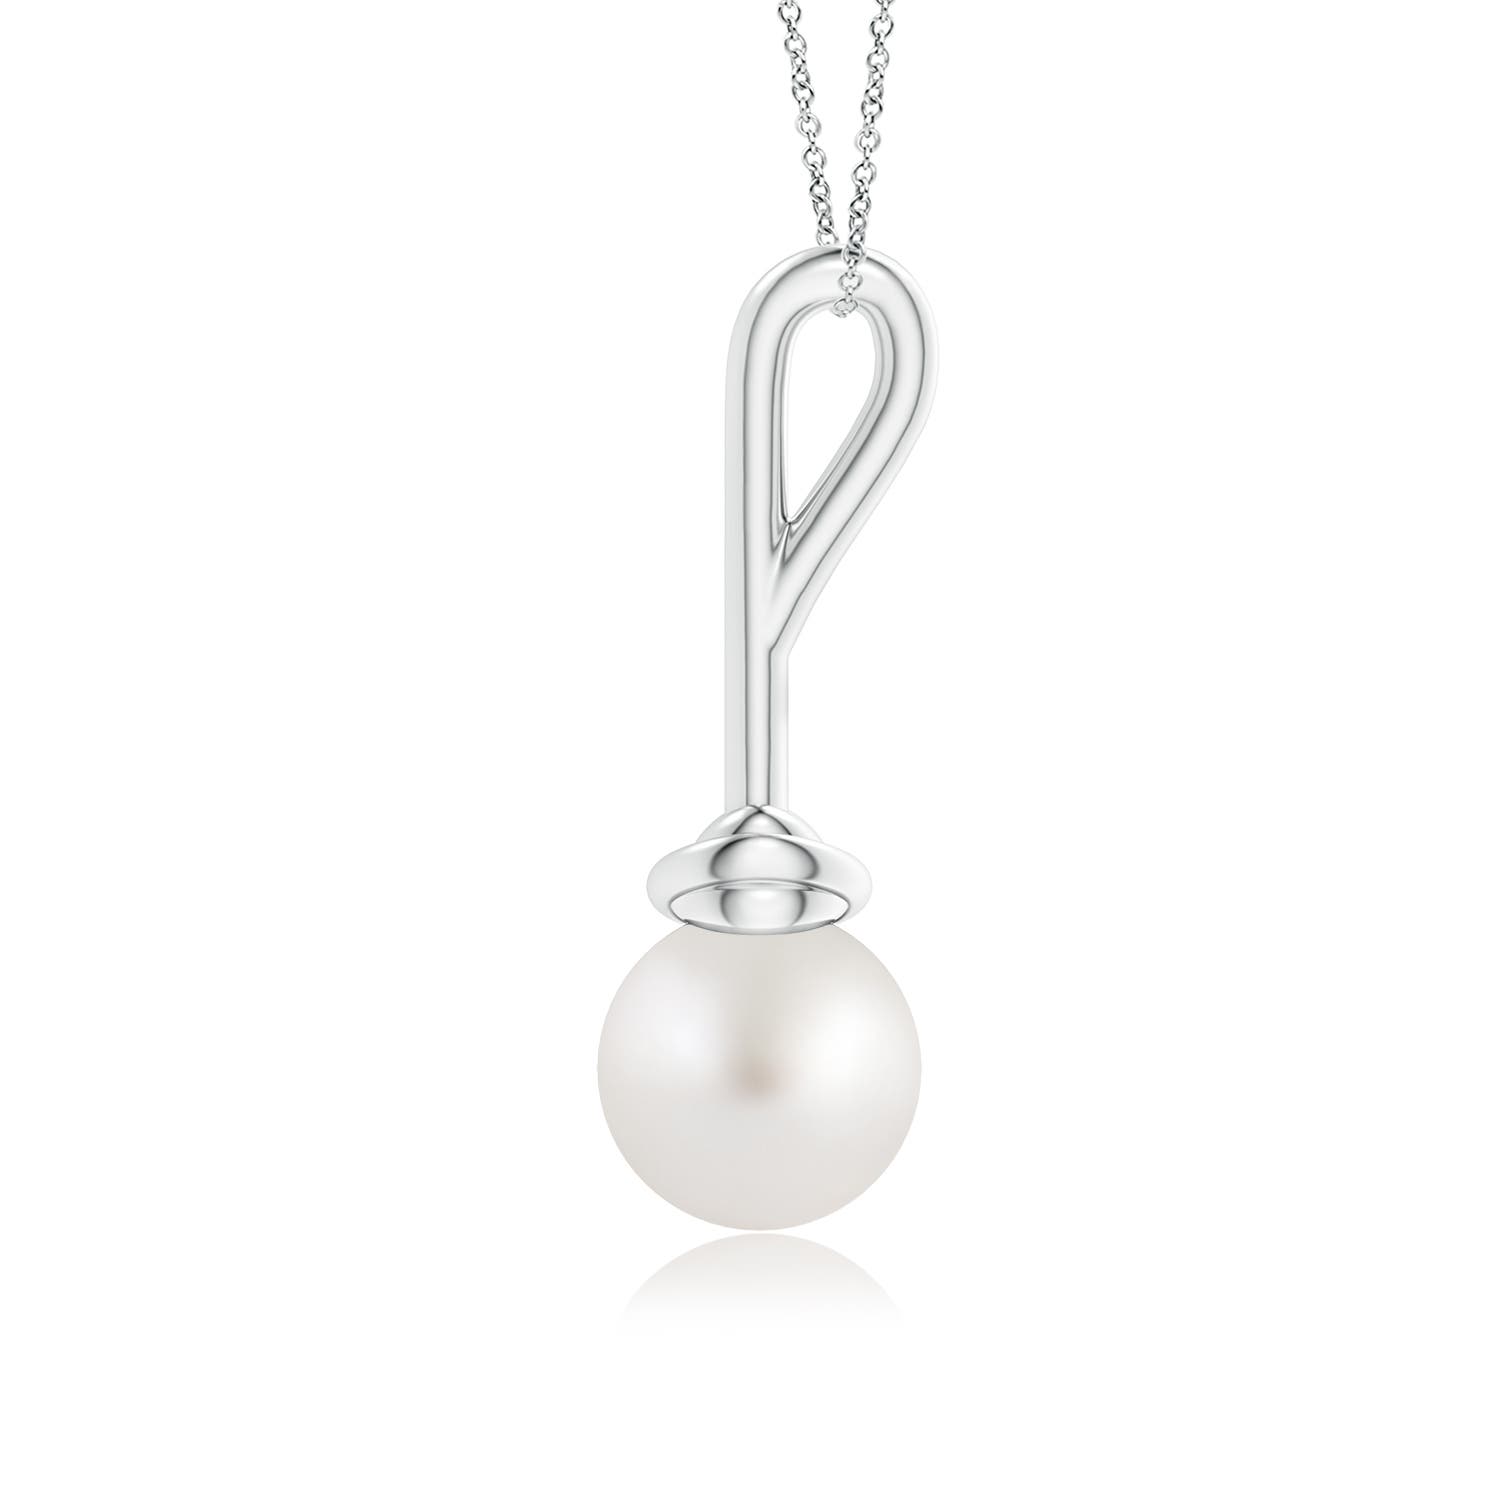 AA - South Sea Cultured Pearl / 5.25 CT / 14 KT White Gold